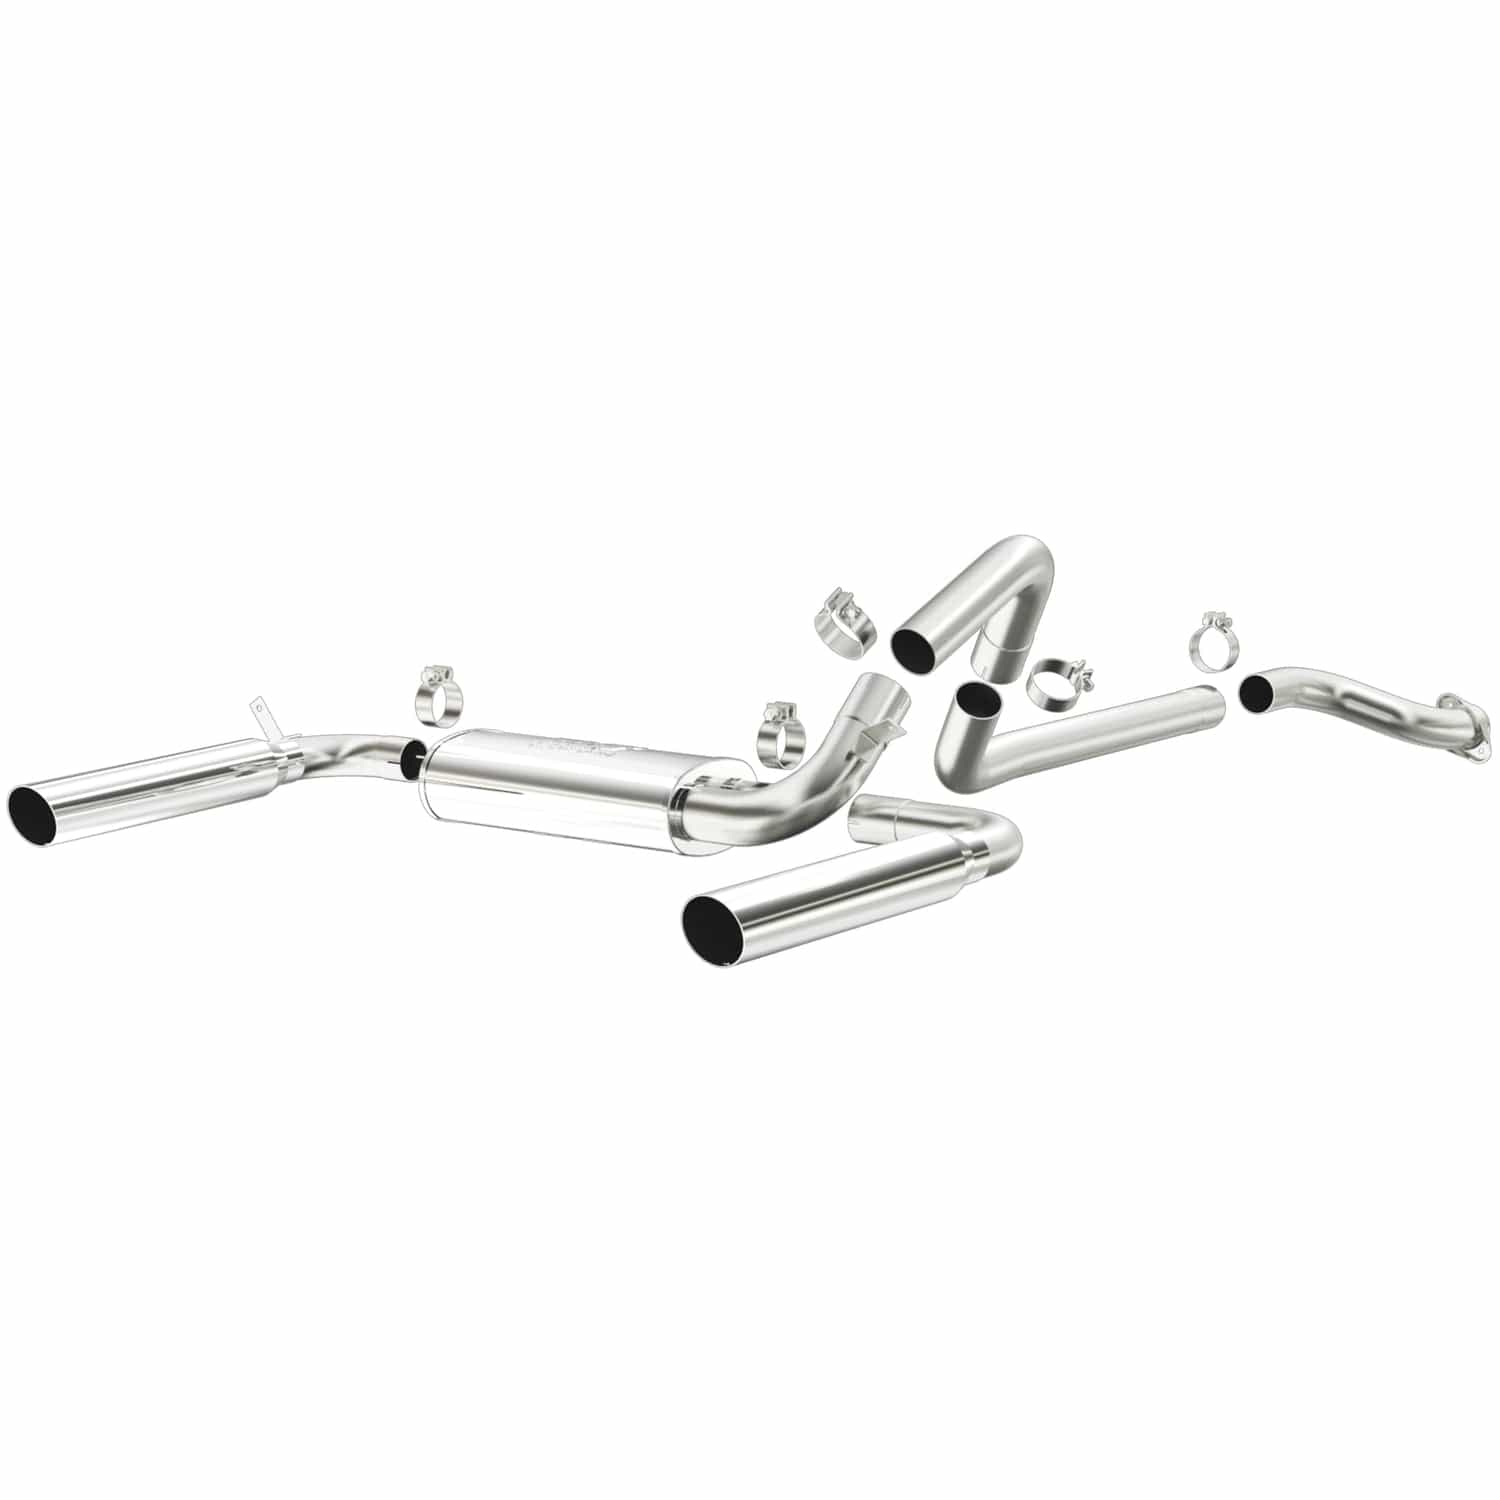 MagnaFlow Street Series Cat-Back Performance Exhaust System 15620